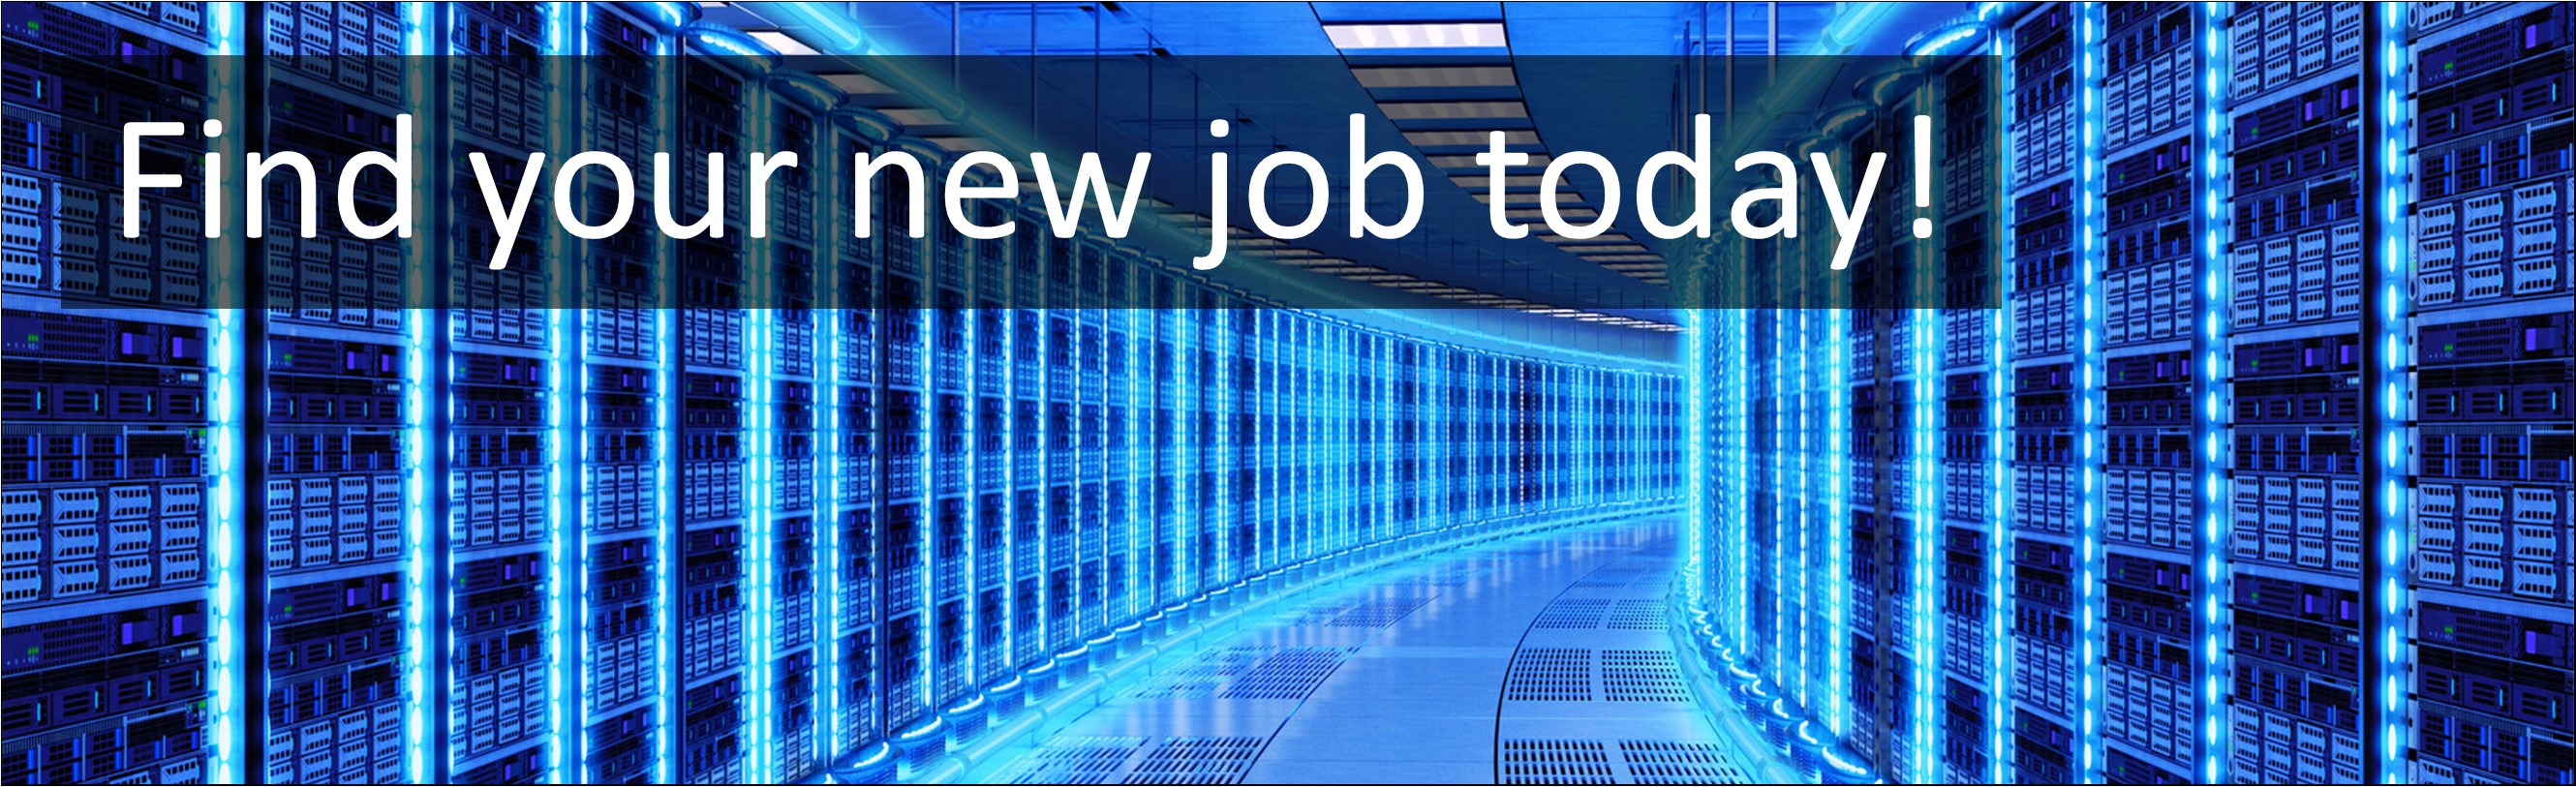 IT & Communication Jobs. IT Help Desk Support Engineer / Service Desk Analyst / First & Second Line Jobs, Careers & Vacancies in Dudley, West Midlands Advertised by AWD online – Multi-Job Board Advertising and CV Sourcing Recruitment Services